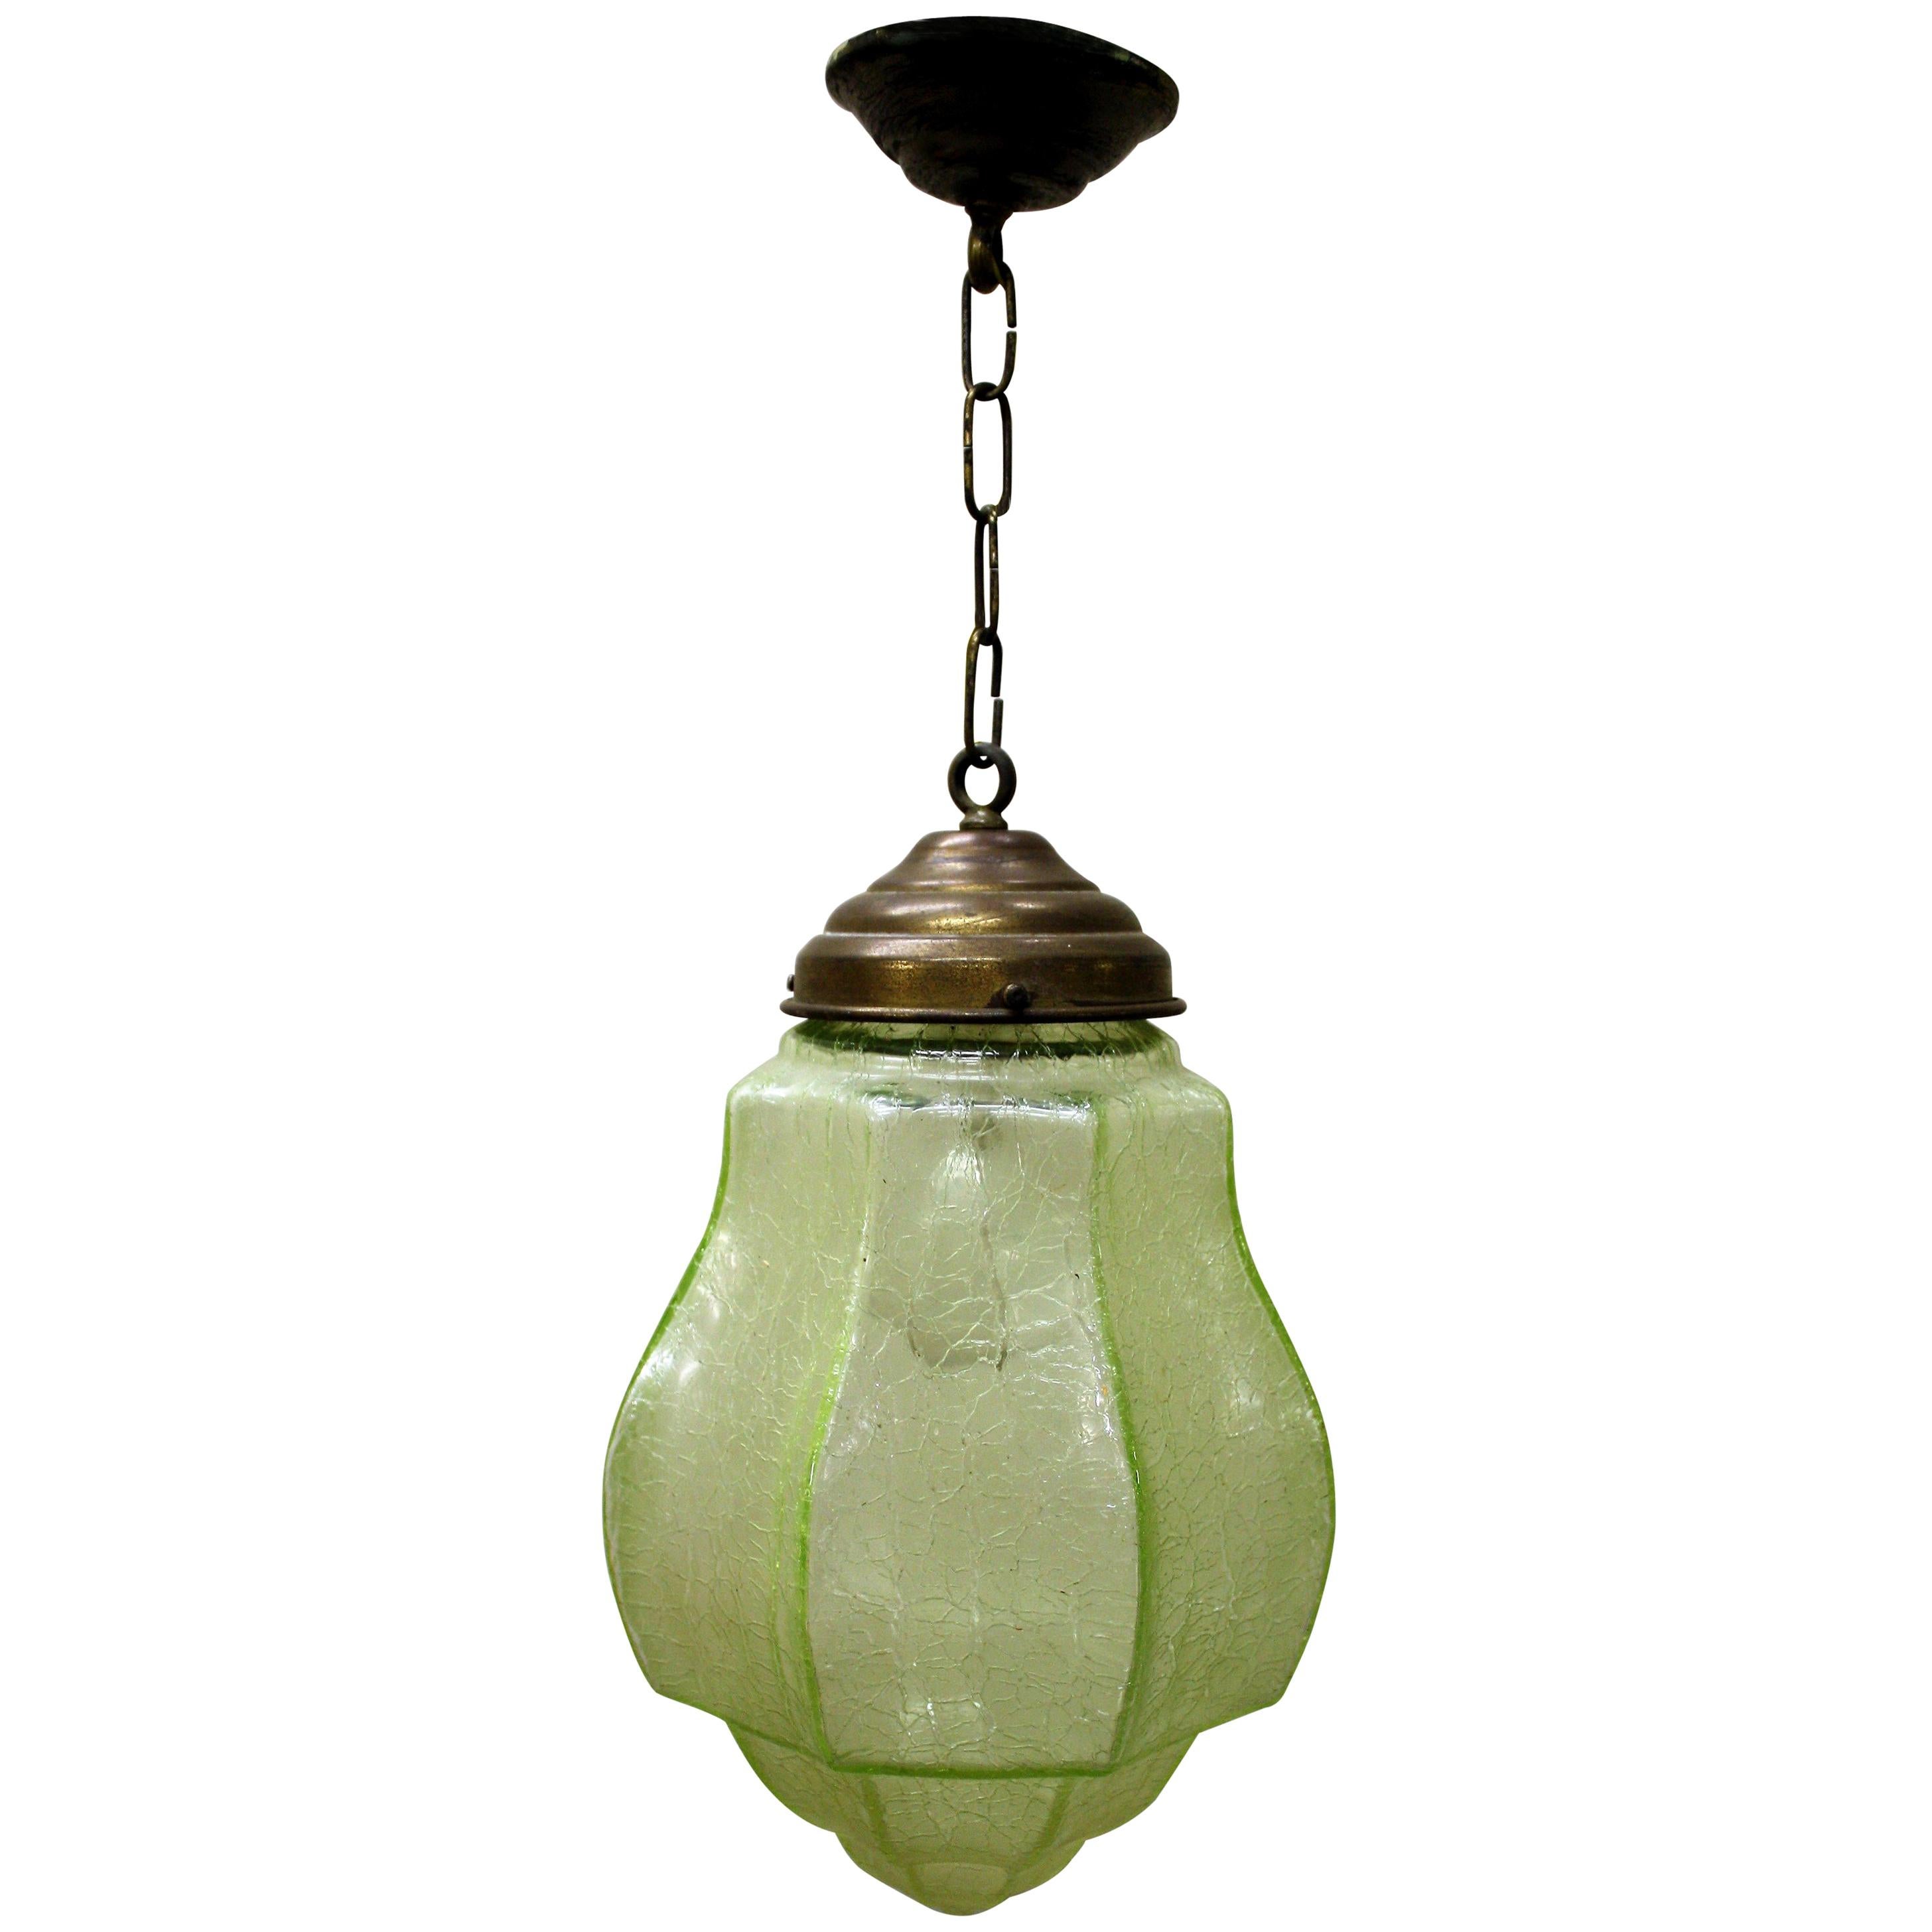 Green Art Deco Pendant Light with Crackle Glass, 1930s